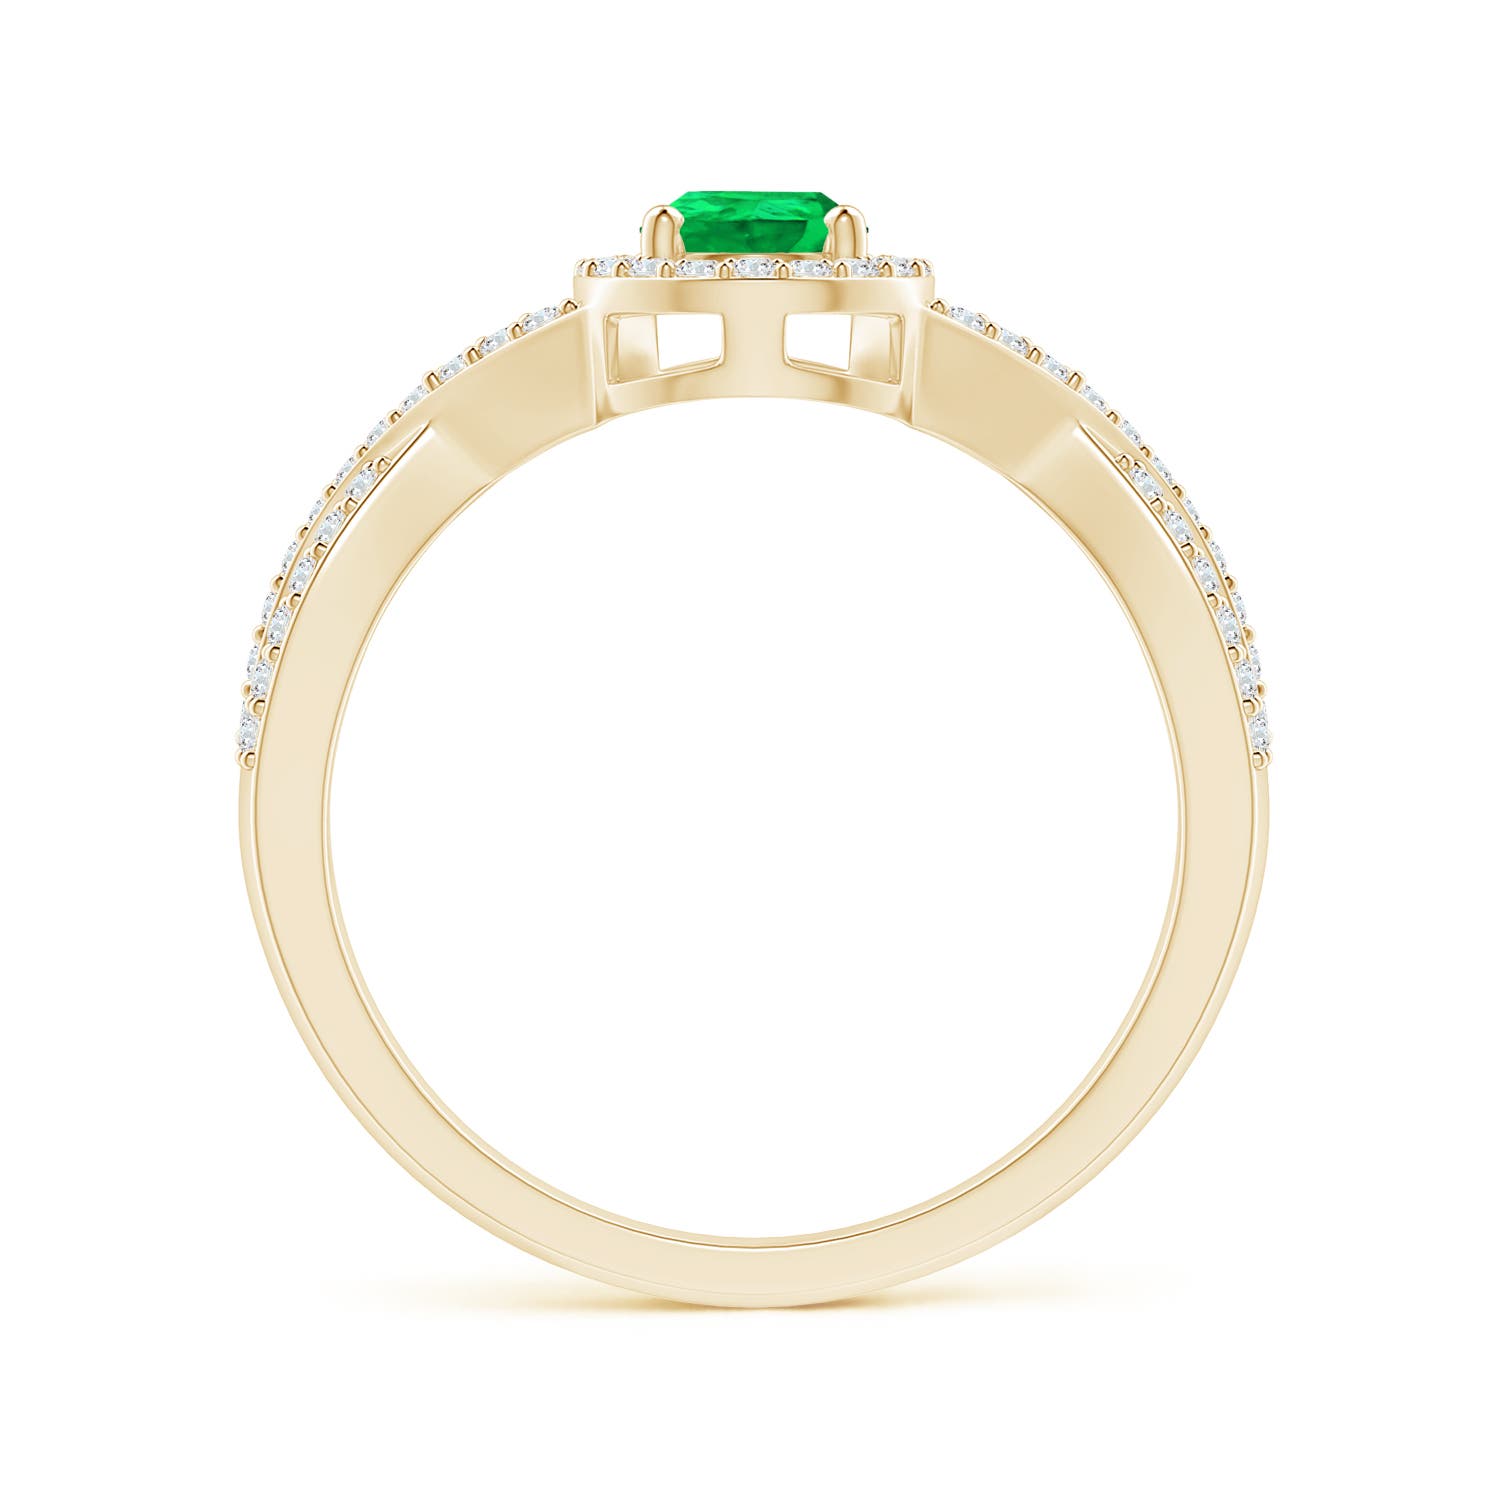 AAA - Emerald / 0.65 CT / 14 KT Yellow Gold